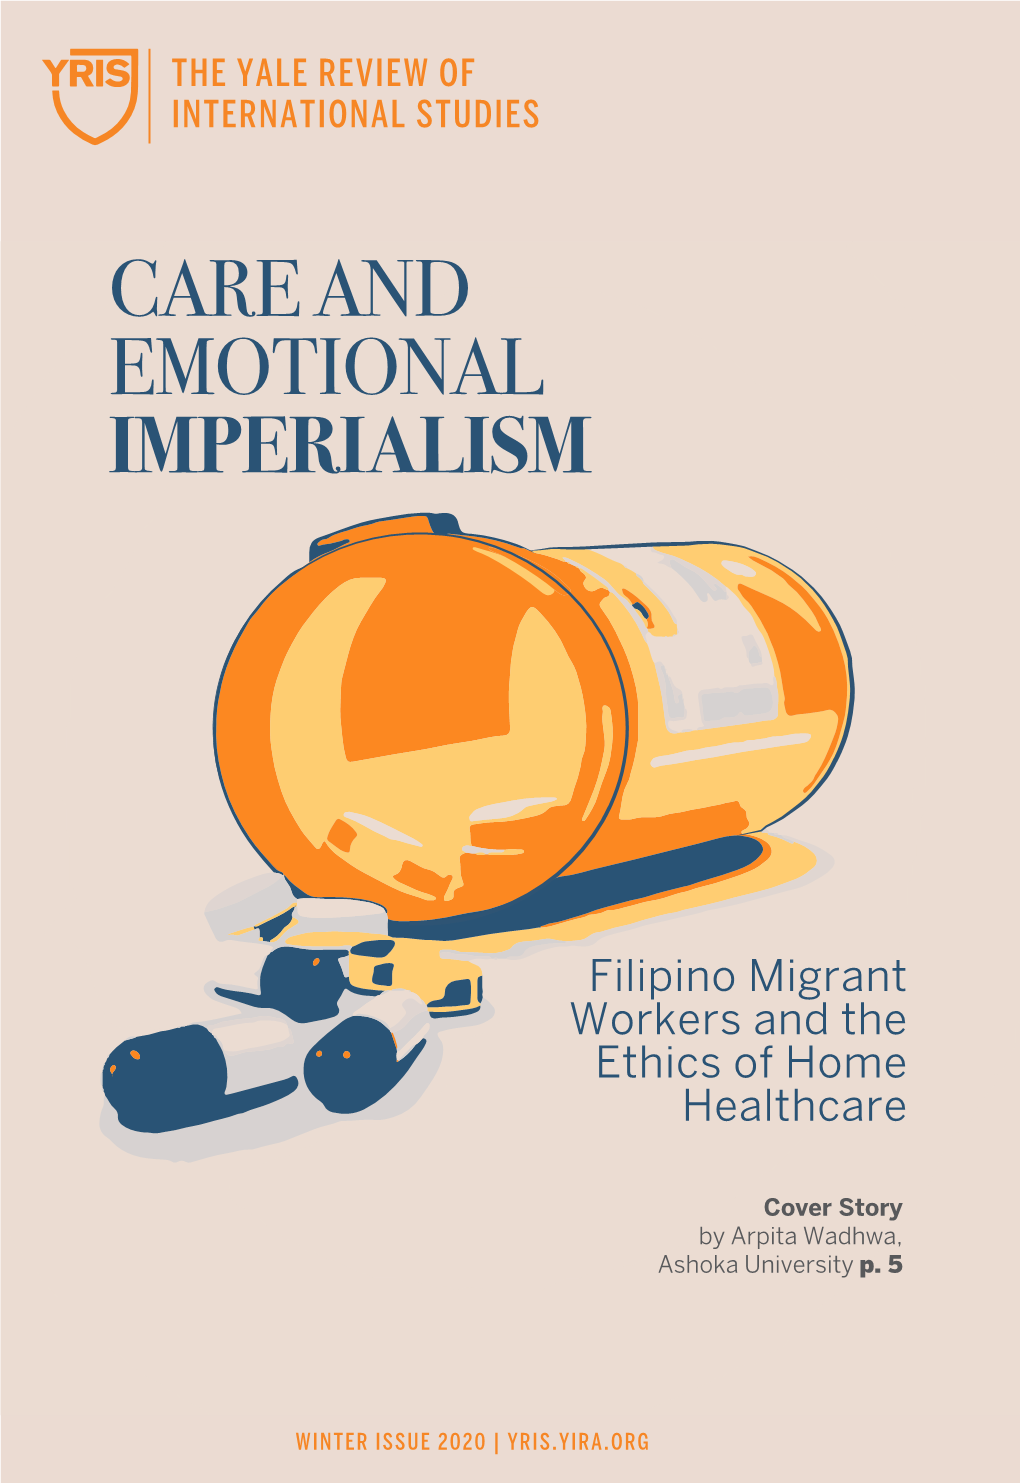 Care and Emotional Imperialism